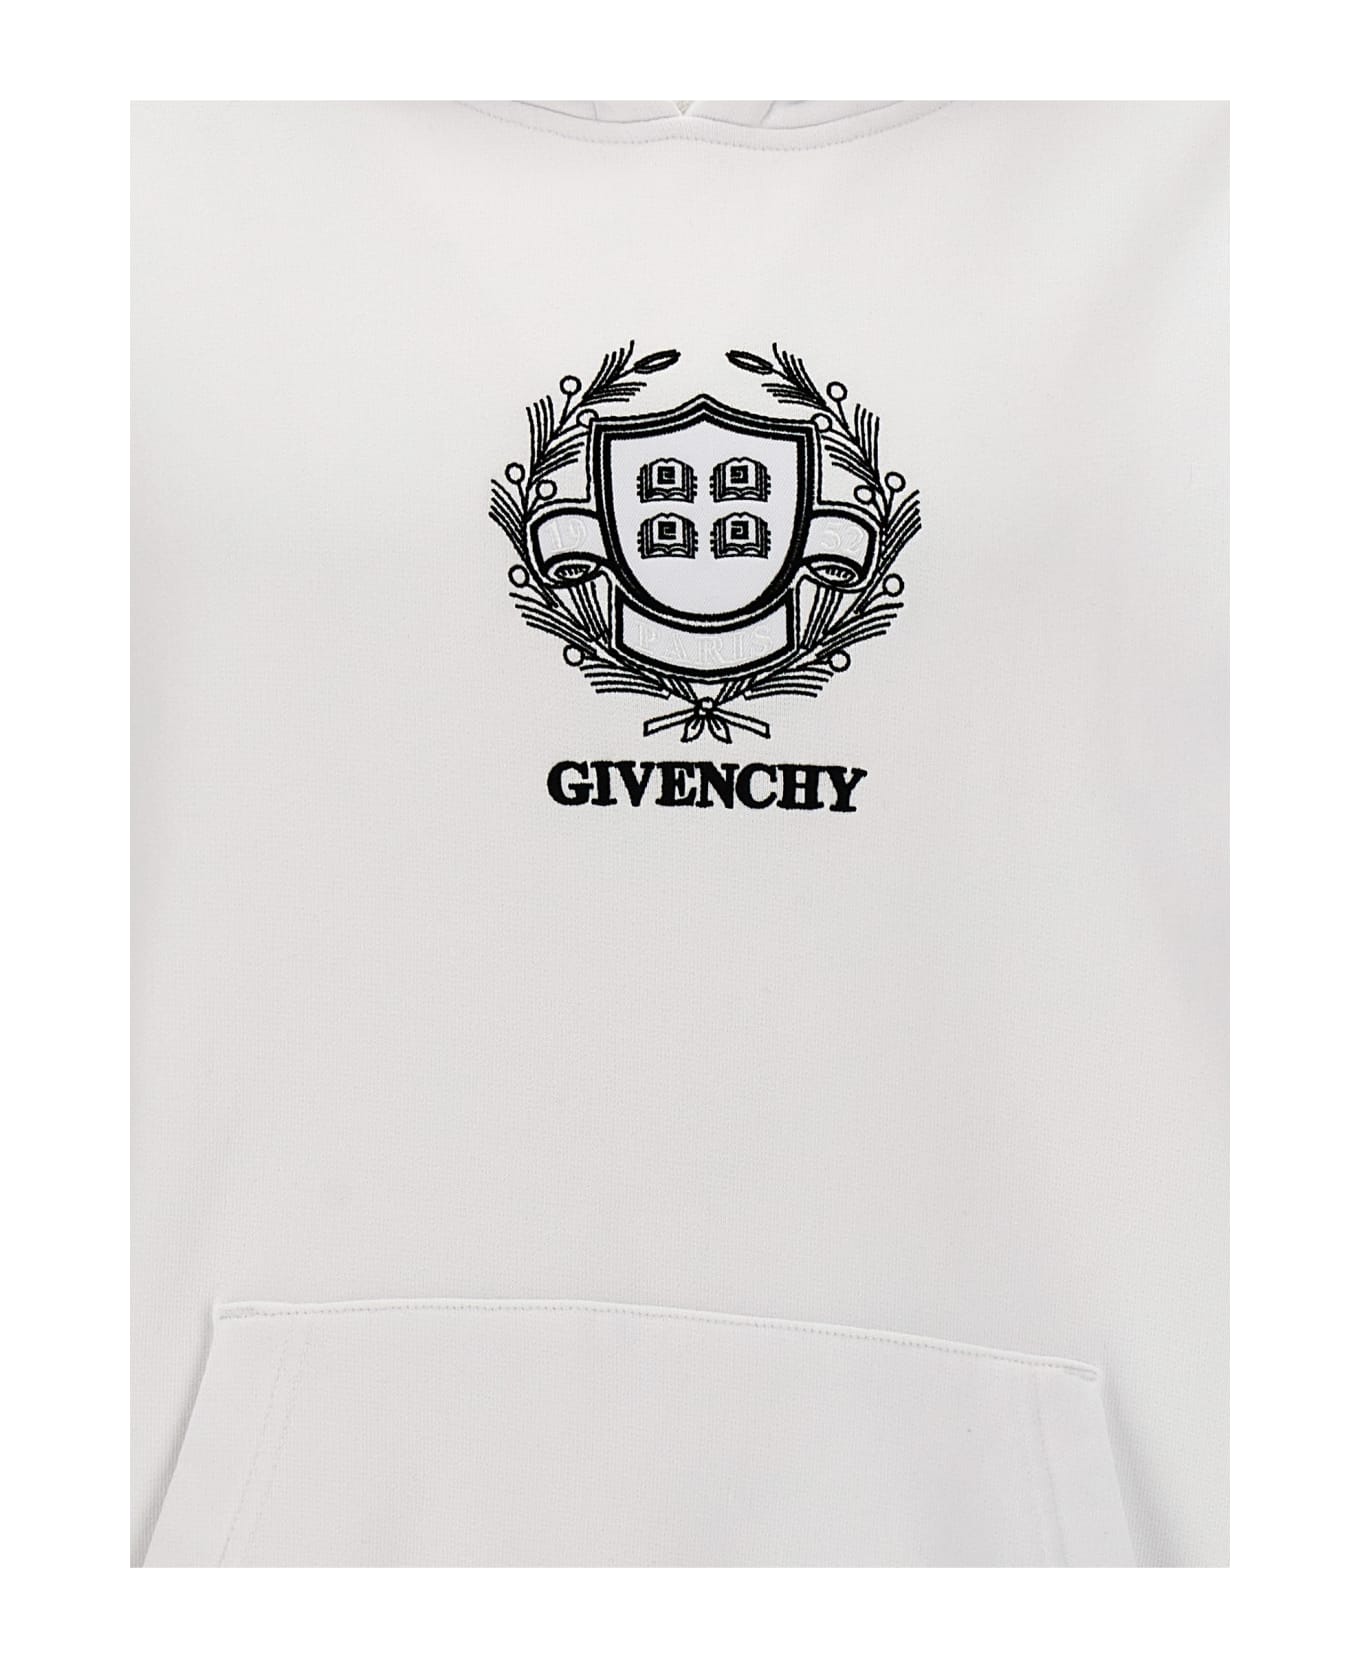 Givenchy Embroidery And Print MMW - White/Black